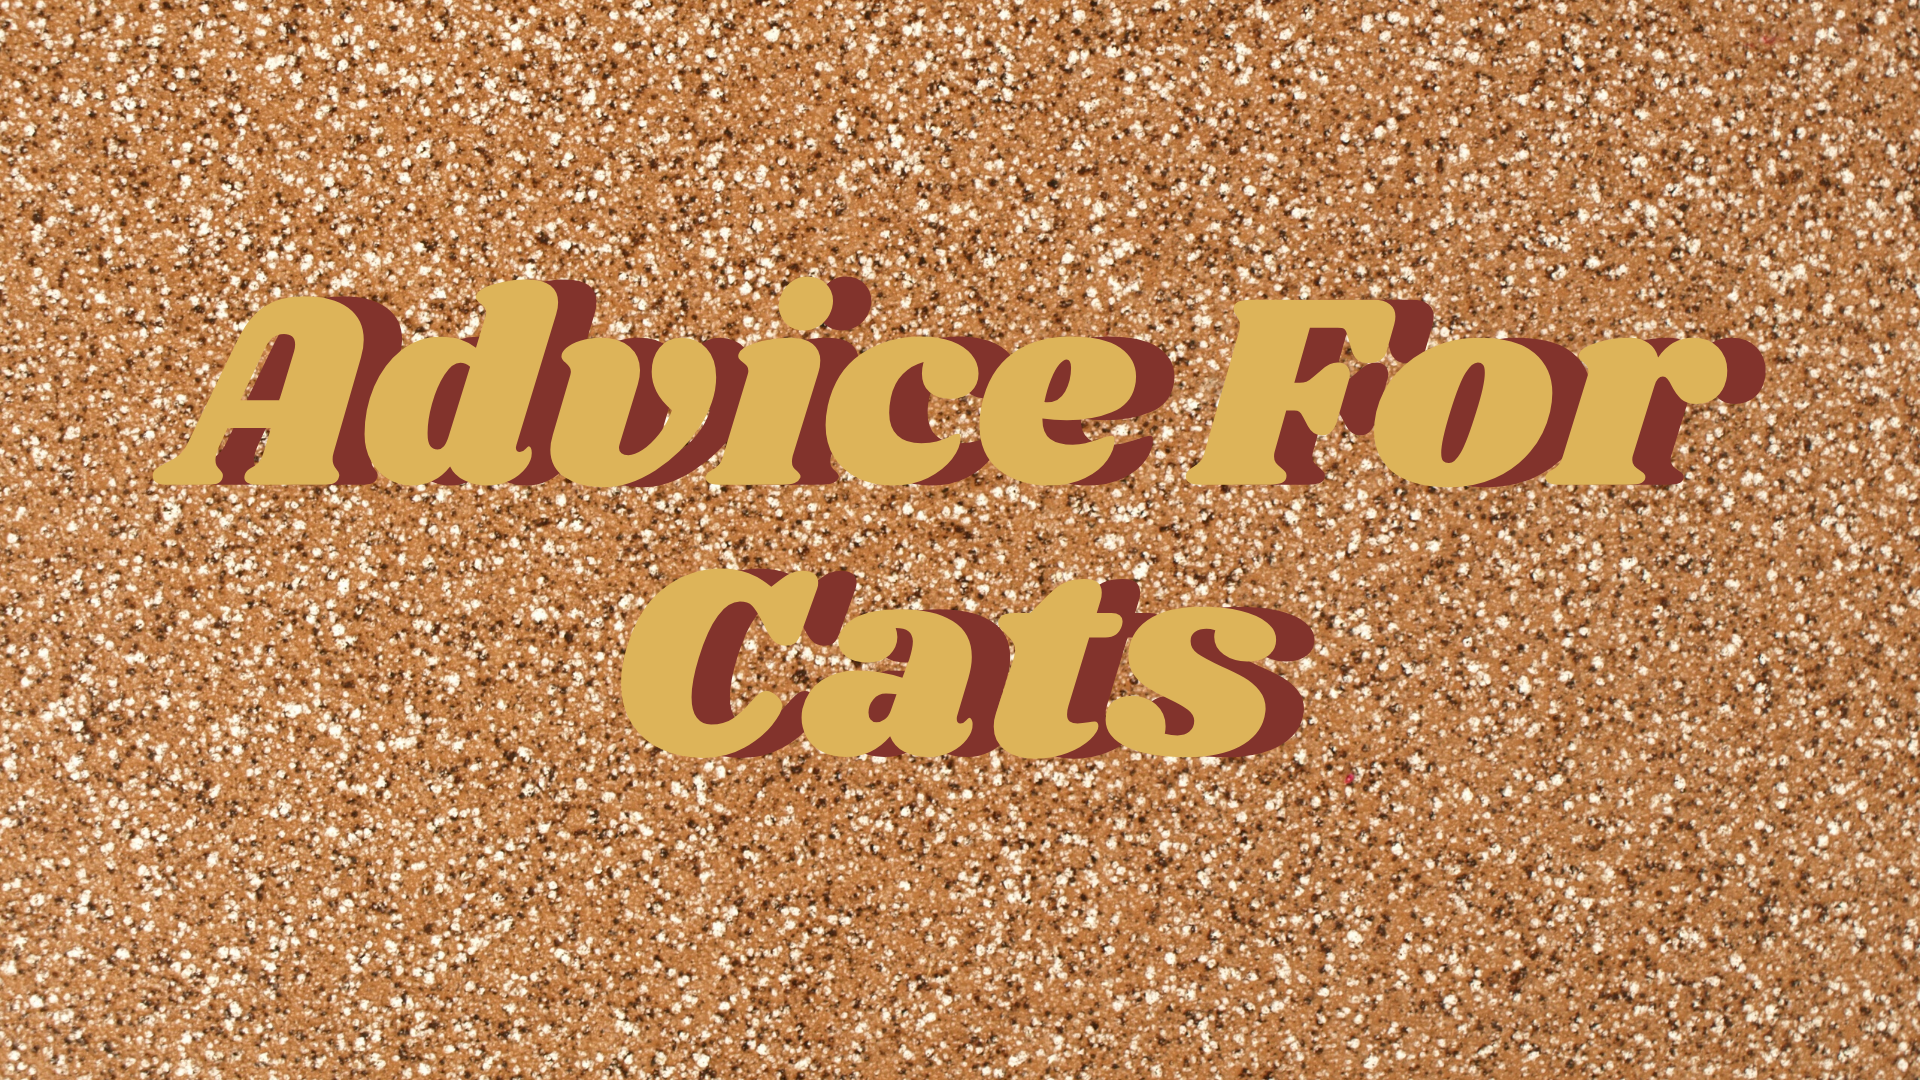 Advice for cats writing in maroon on a sparkly gold background